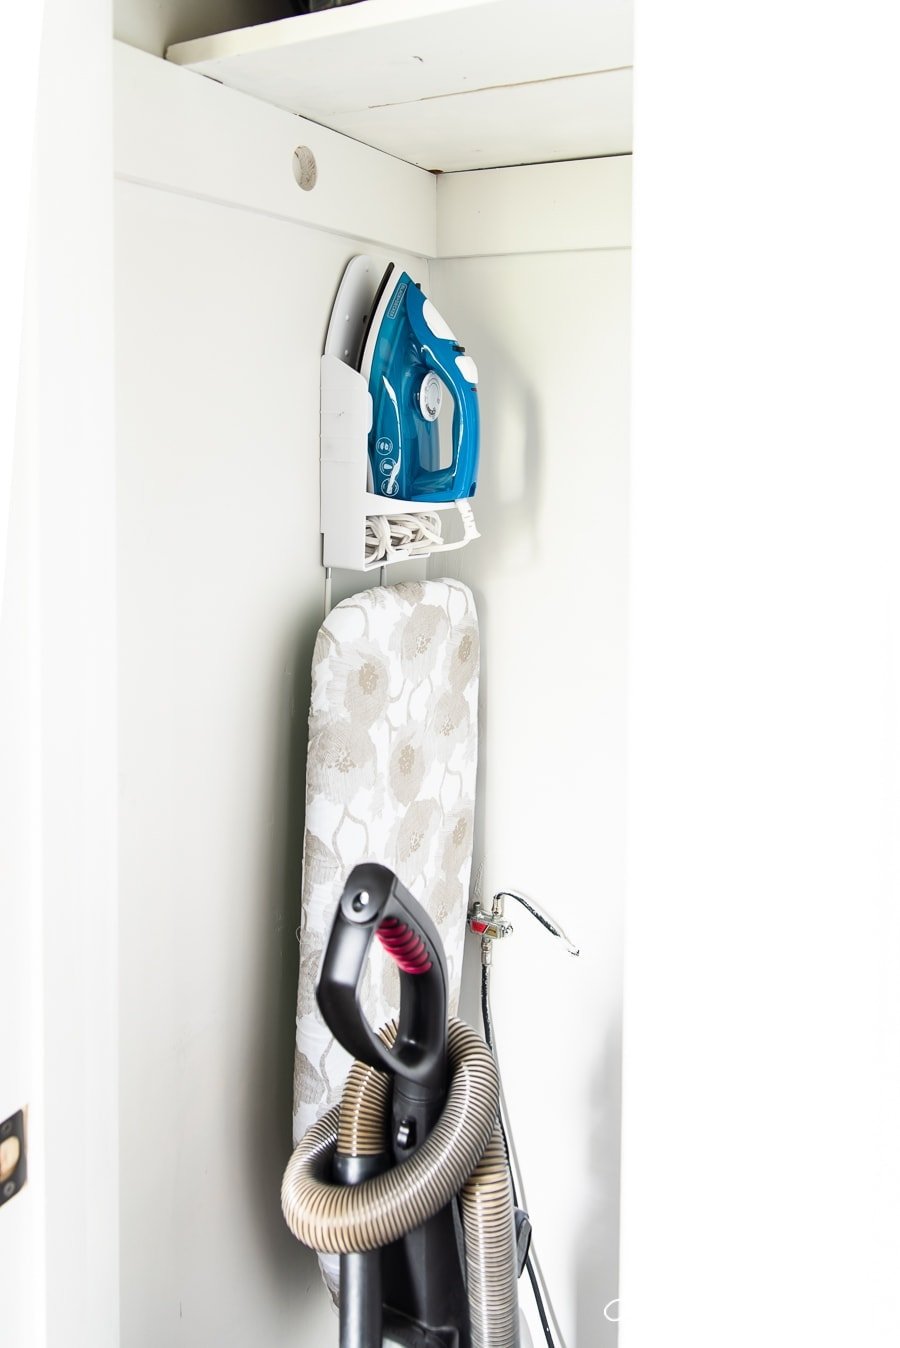 A close-up of wall-mounted holder for an iron and the ironing board